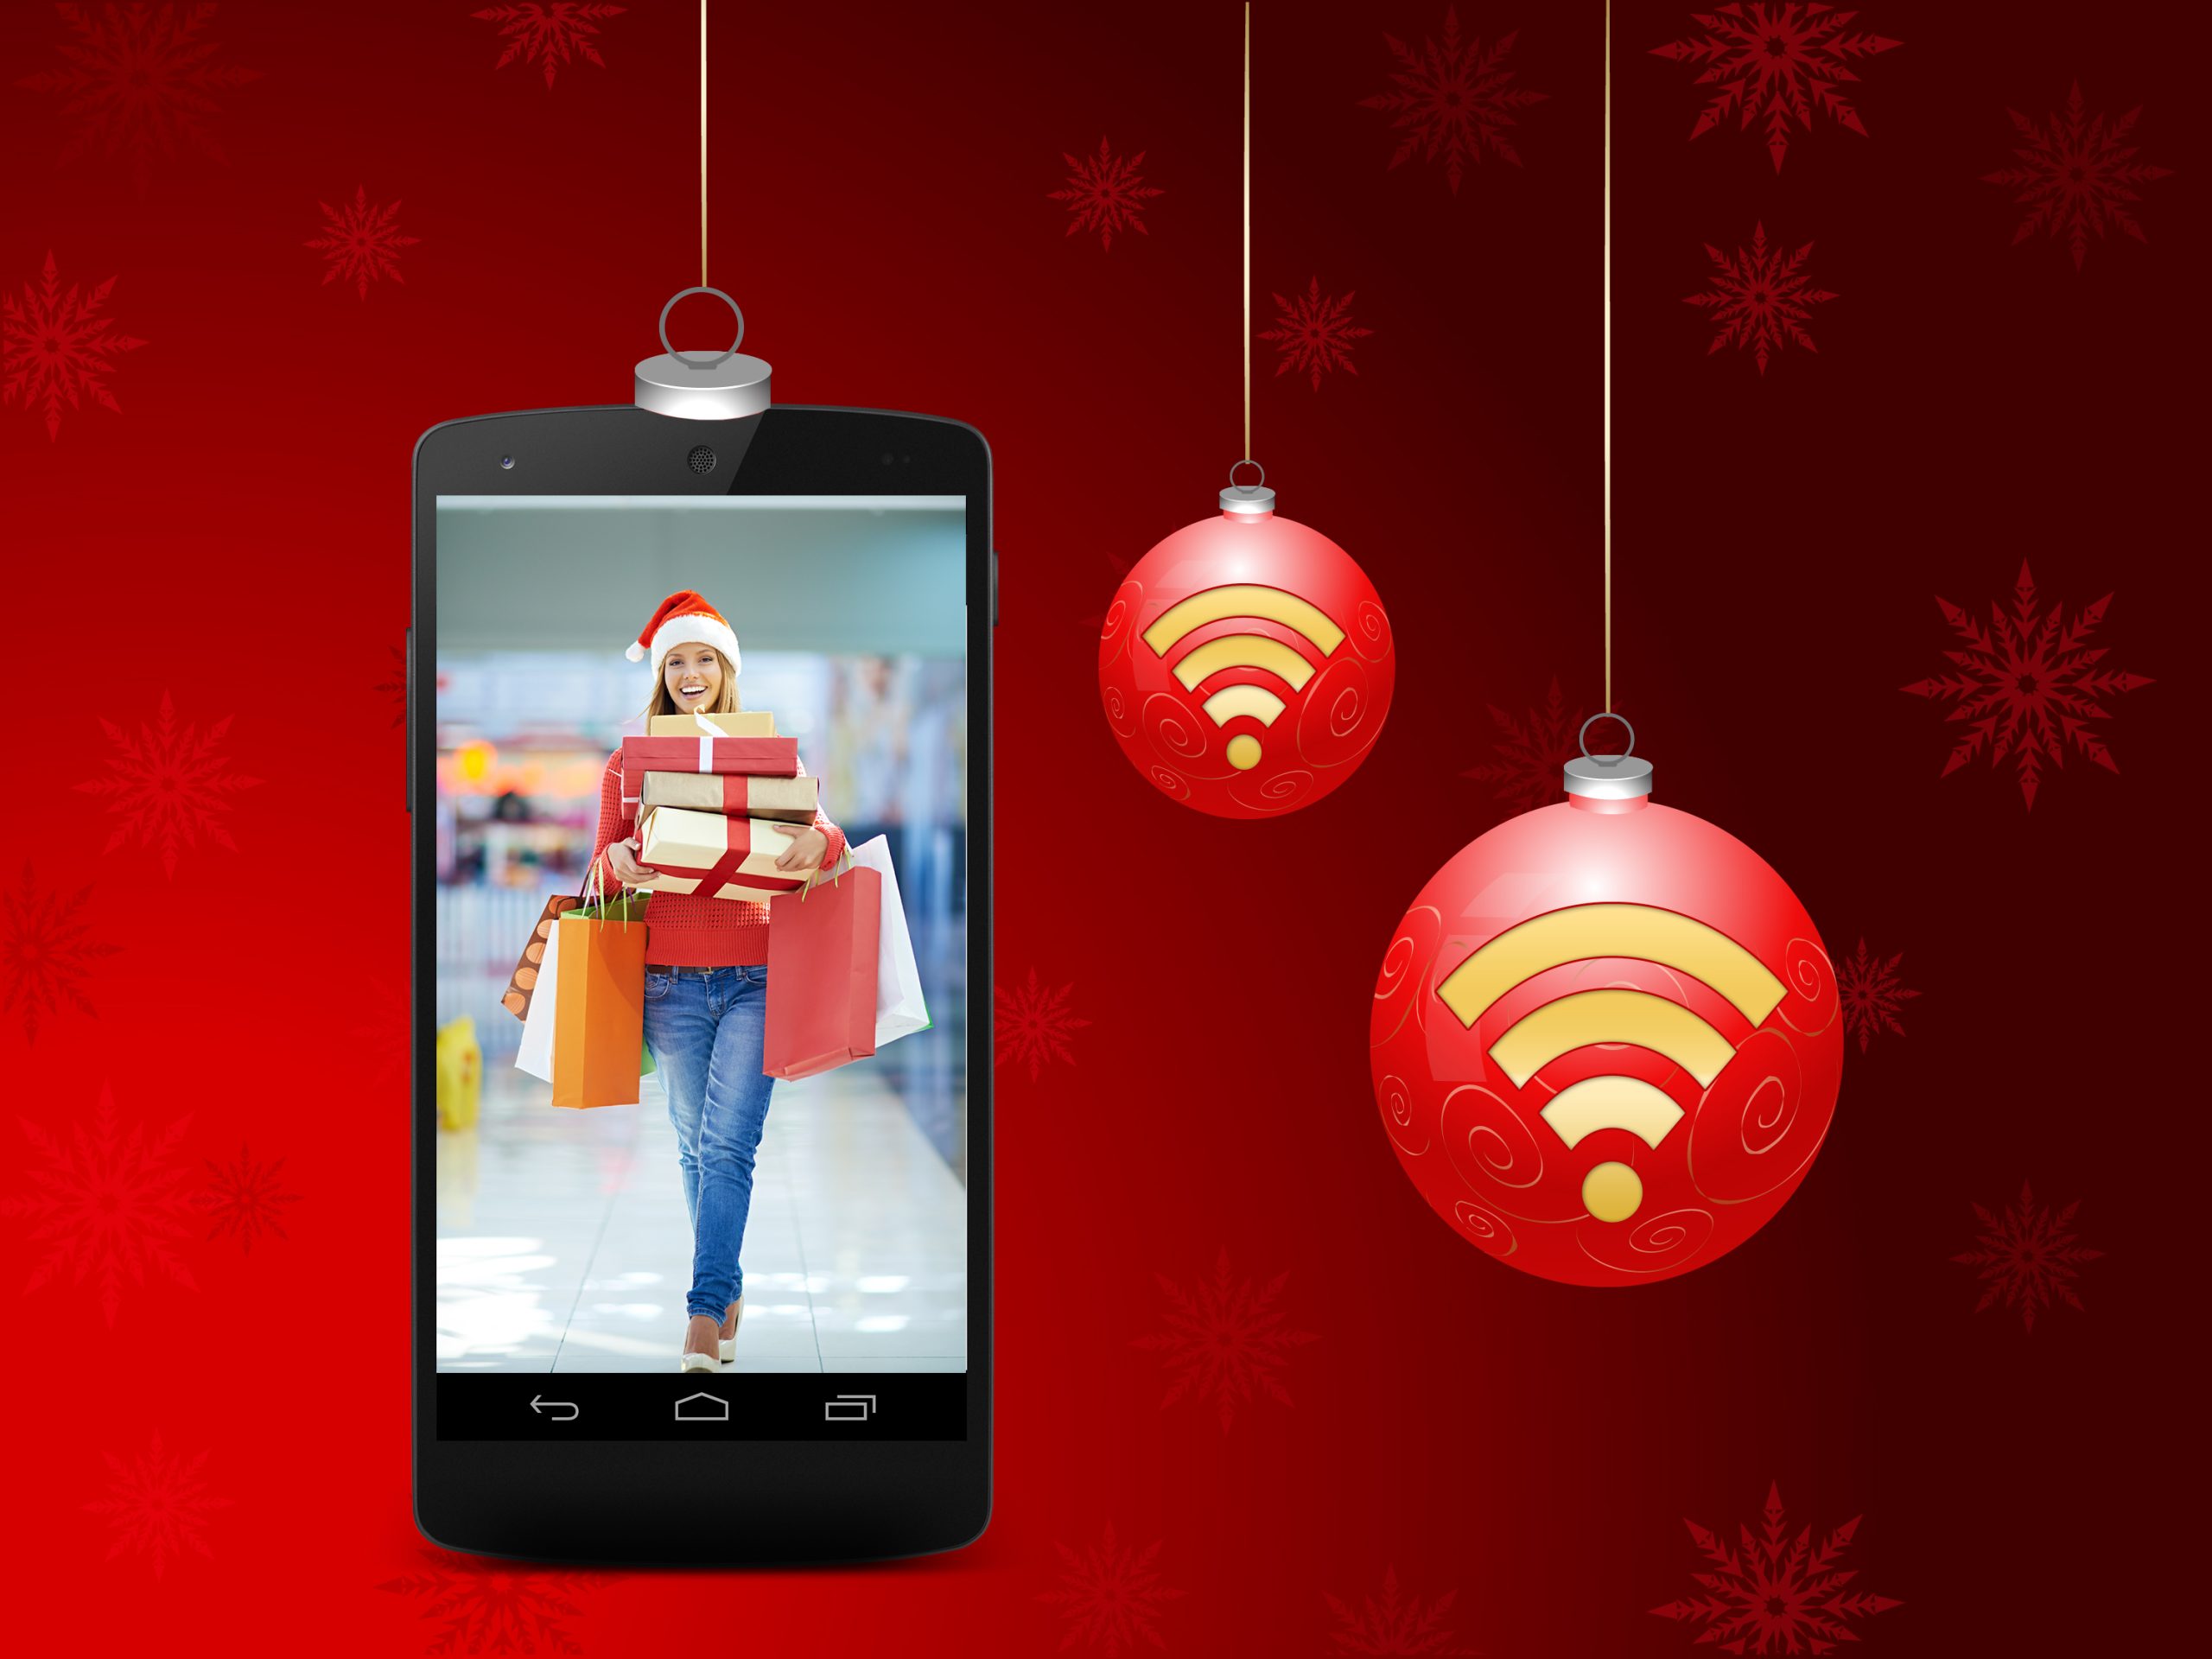 Christmas. Customers. Connectivity. Transforming In-store Experience with Wi-Fi this season